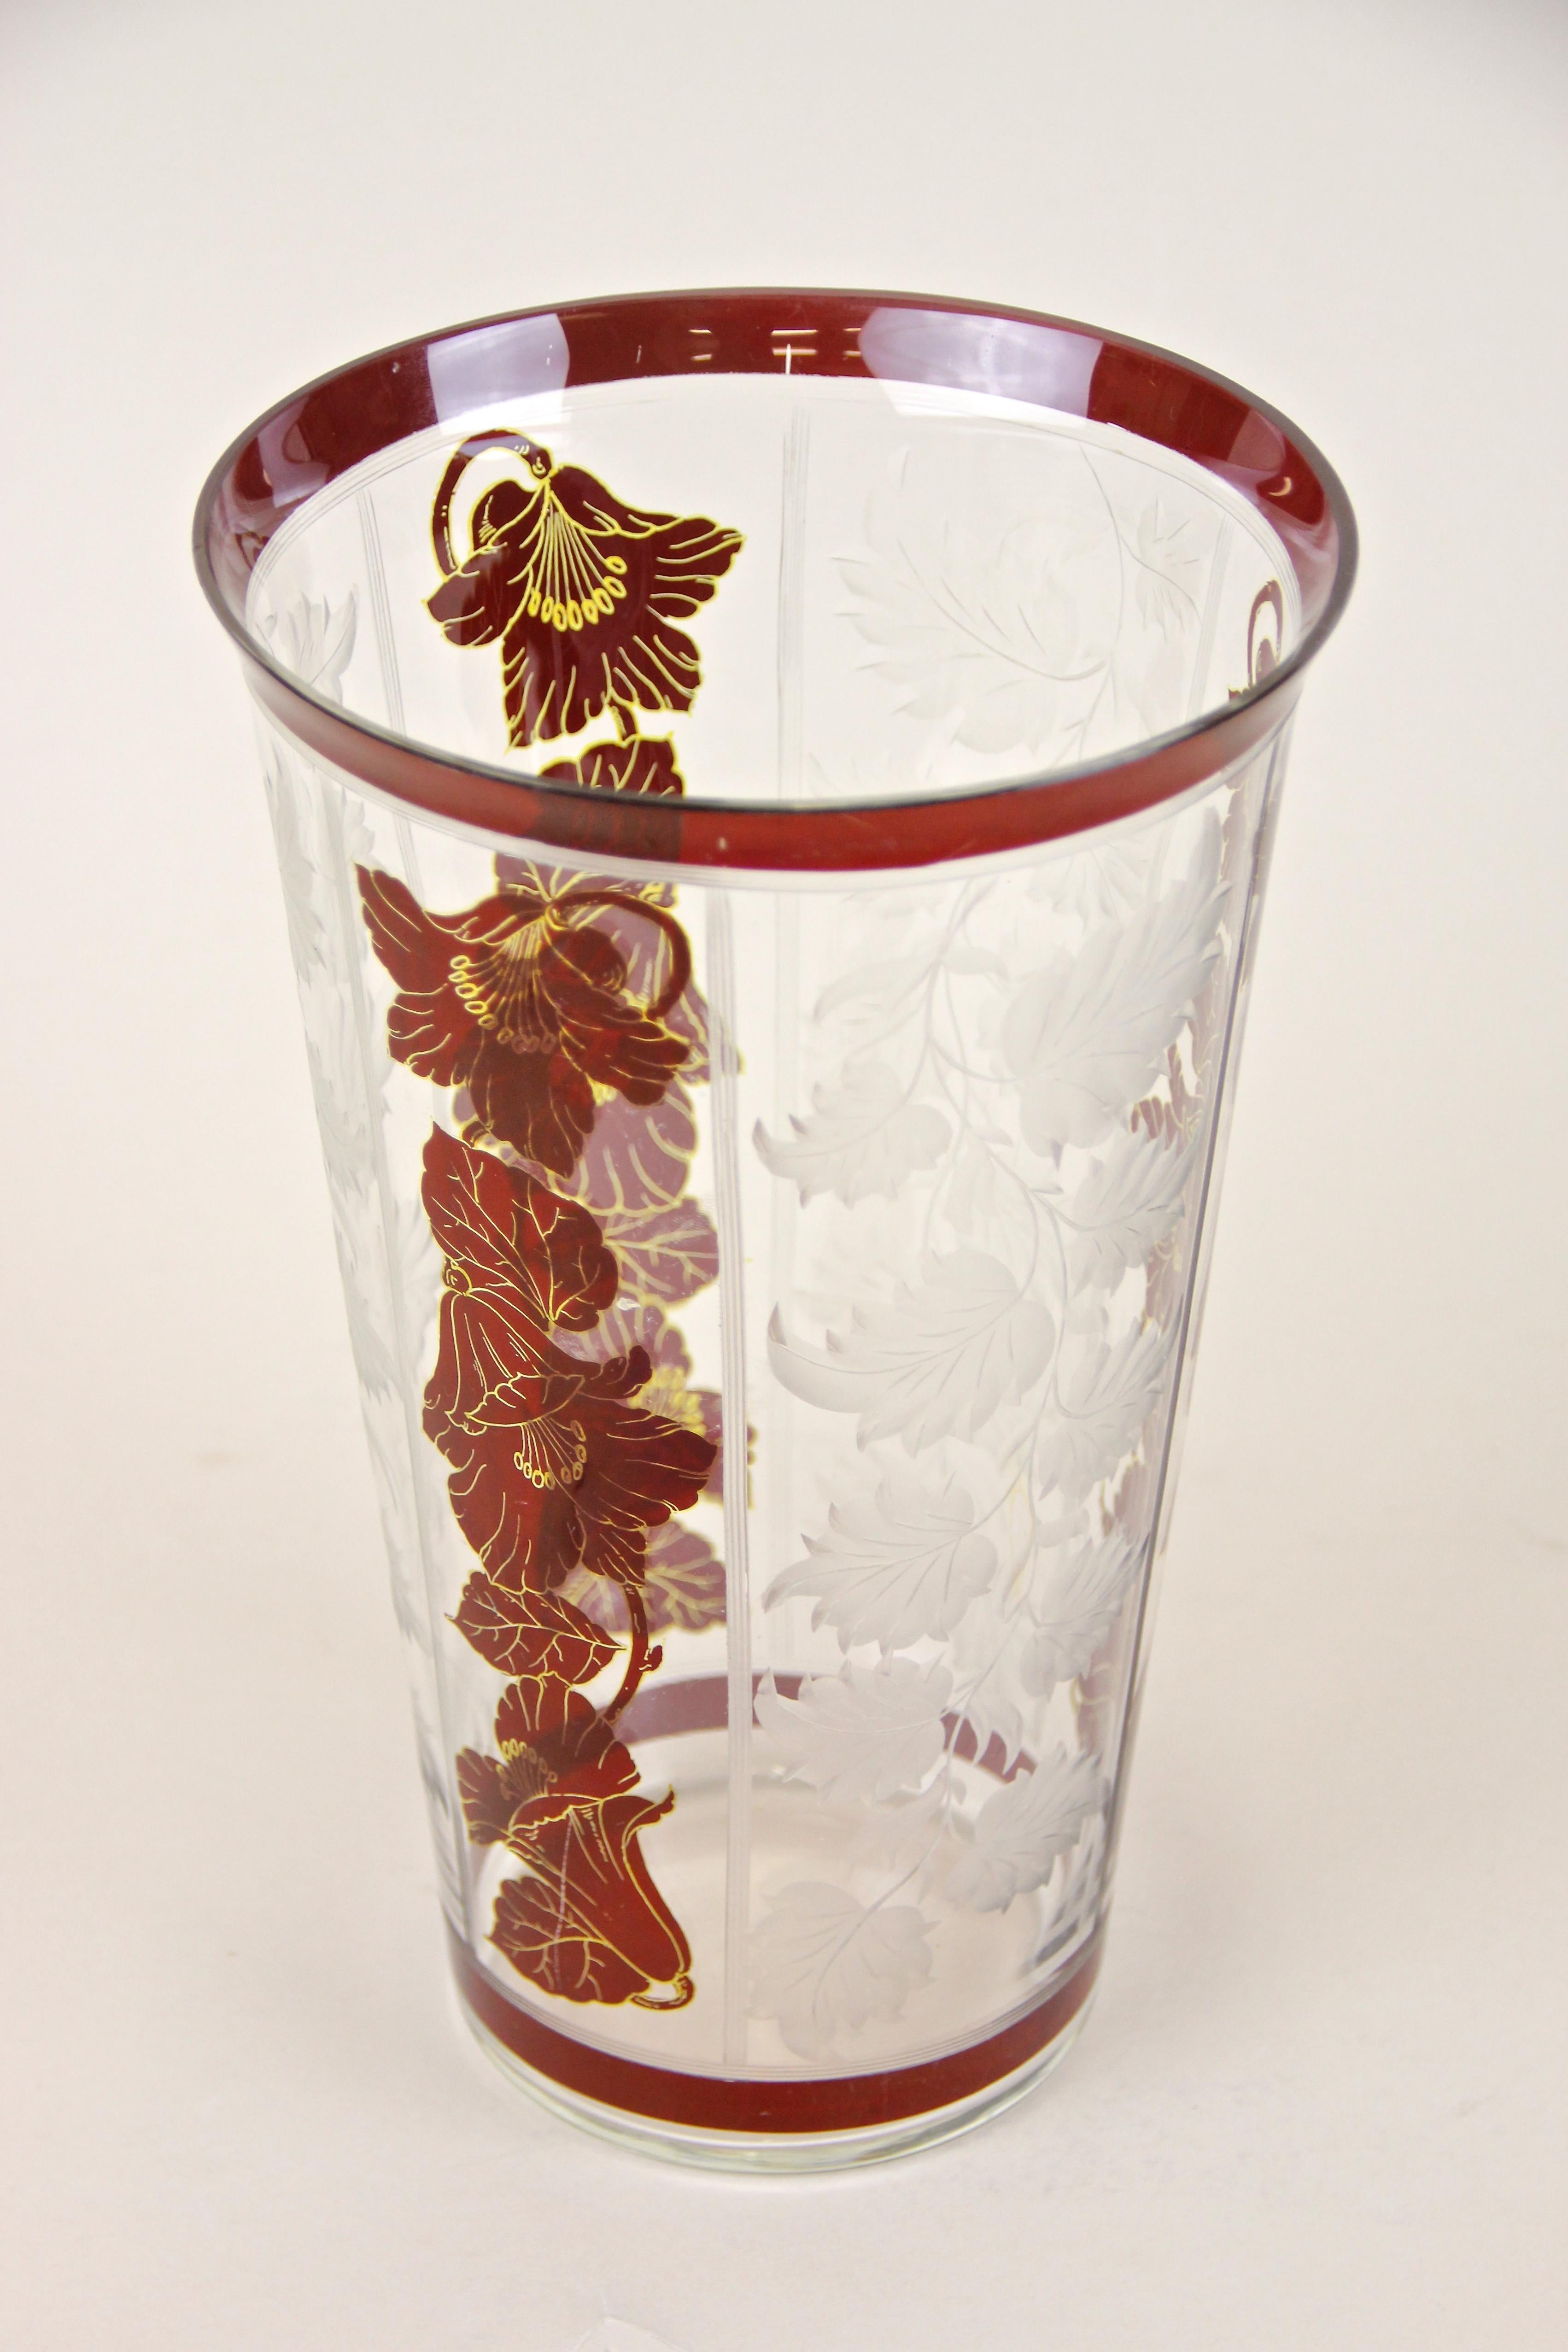 Painted Art Nouveau Glass Vase with Flowers and Engraved Leaves, Austria, circa 1900